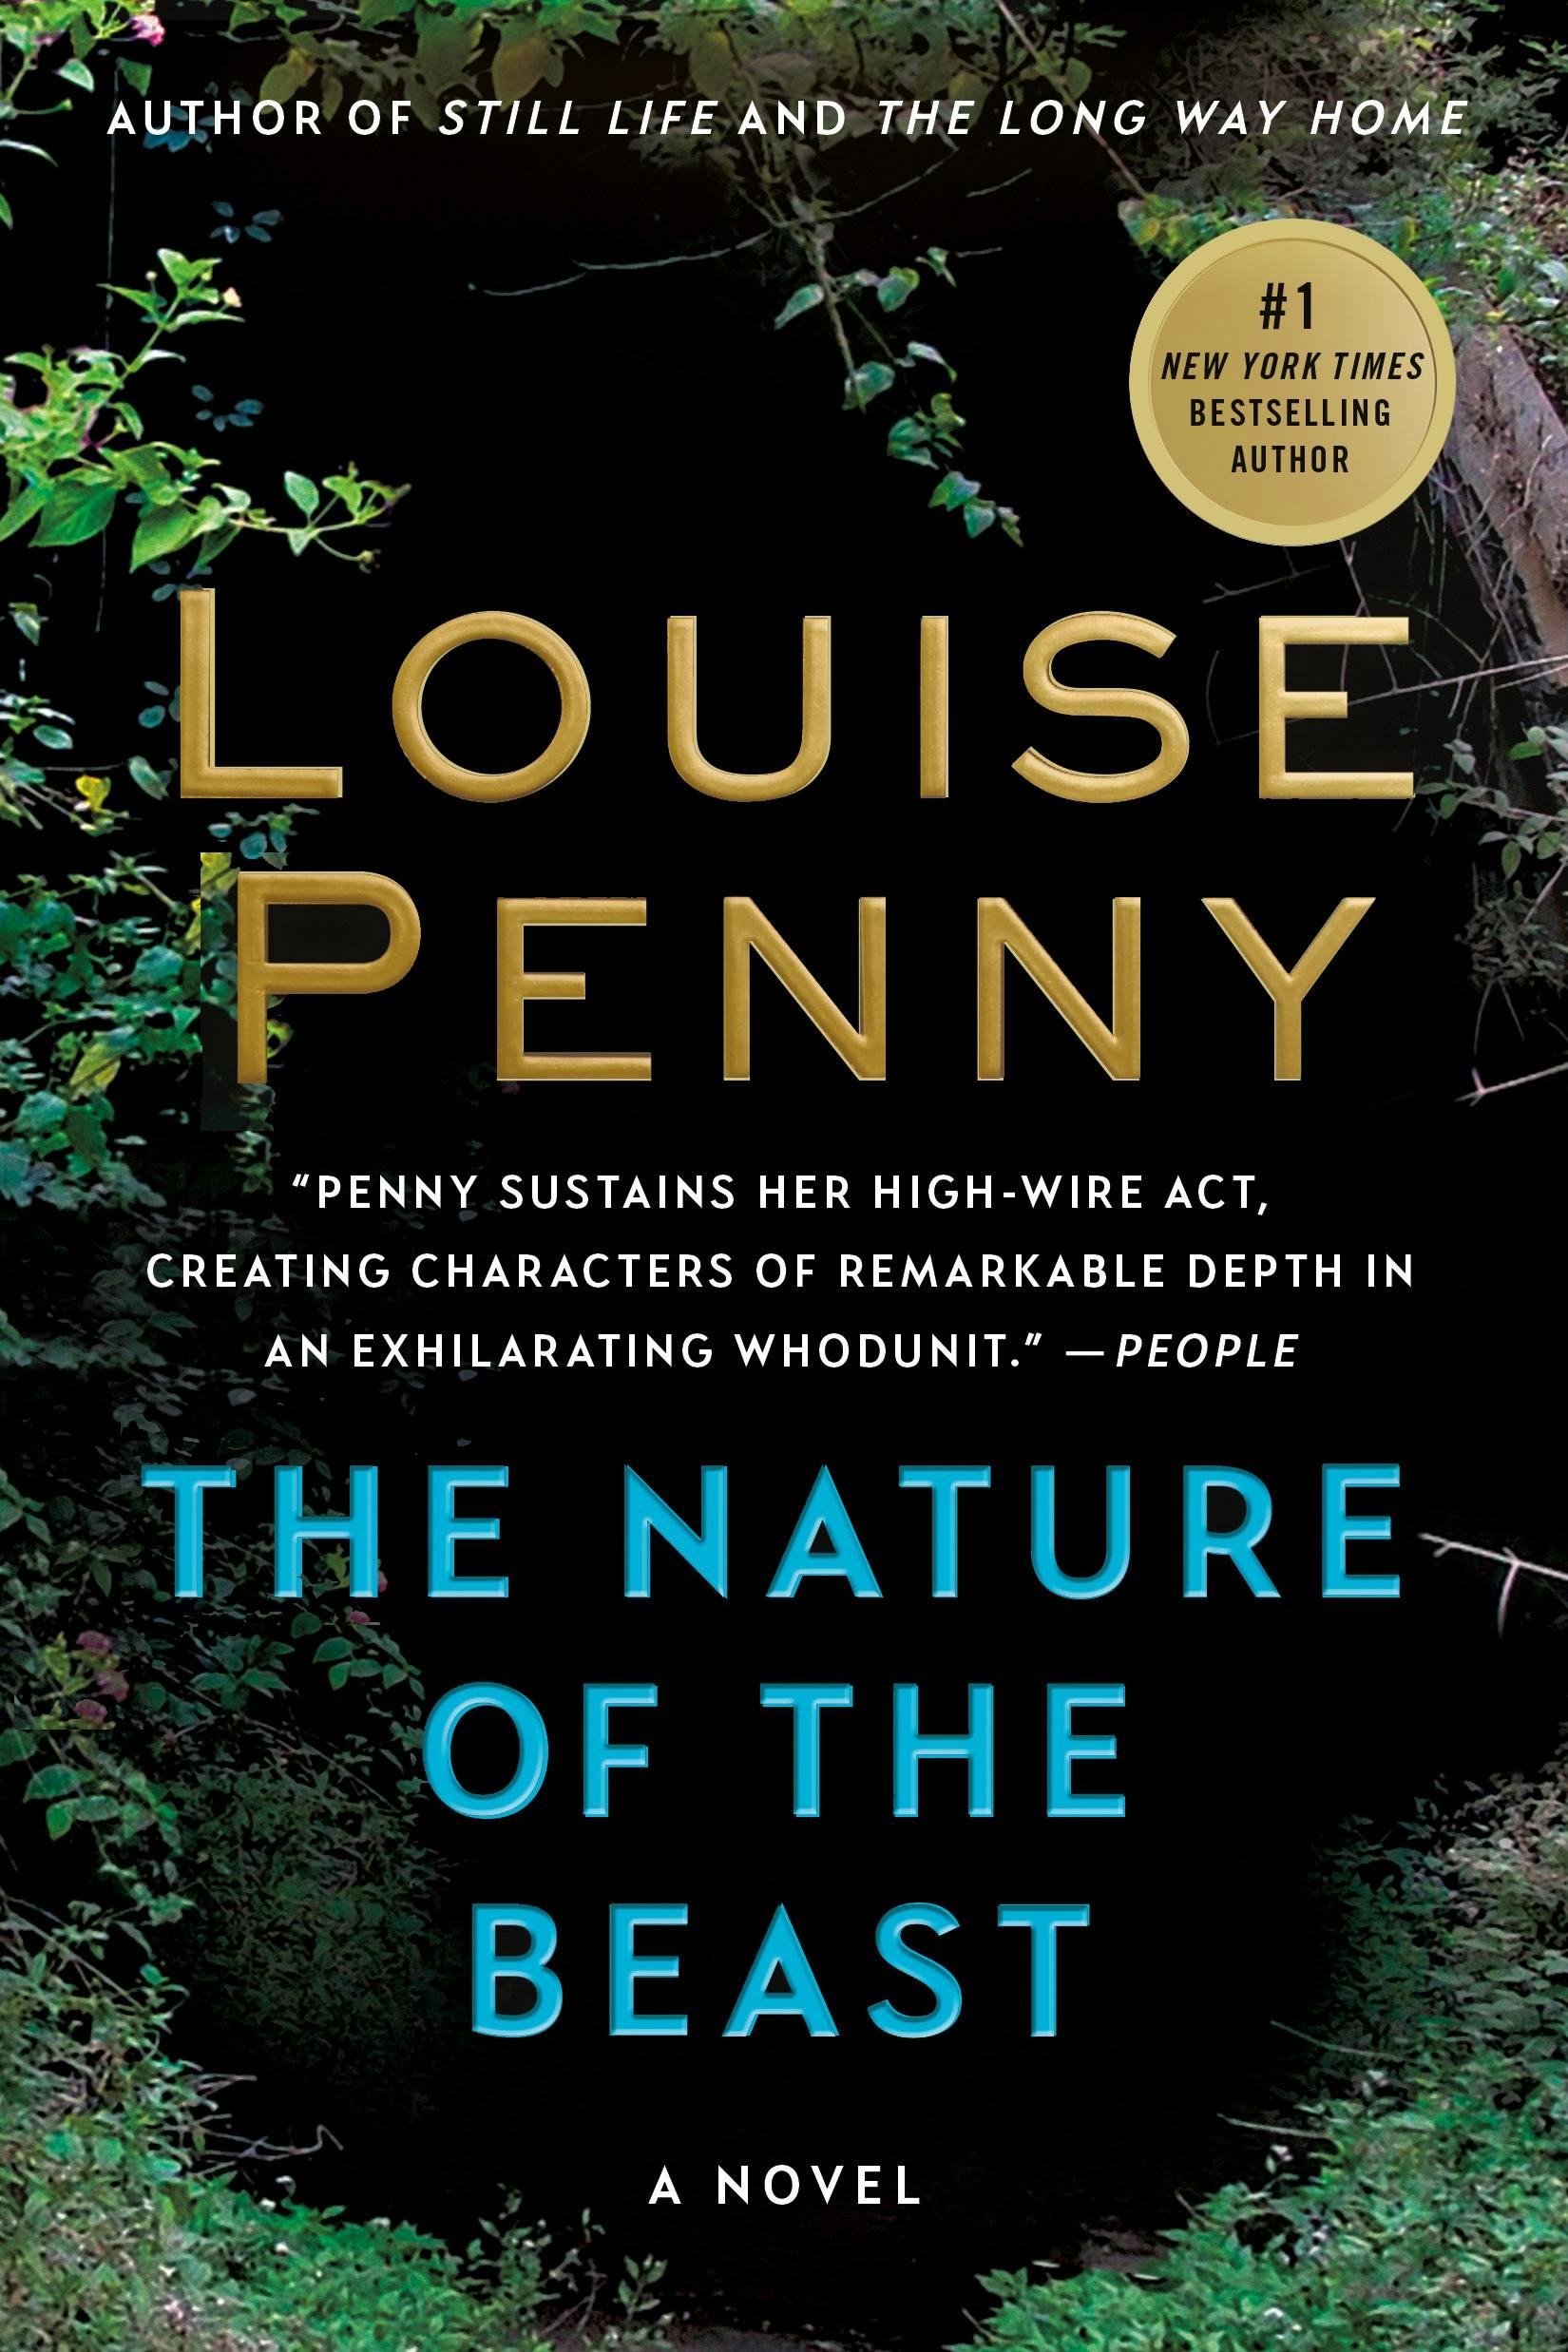 Kingdom of the Blind - (Chief Inspector Gamache Novel) by Louise Penny  (Paperback)